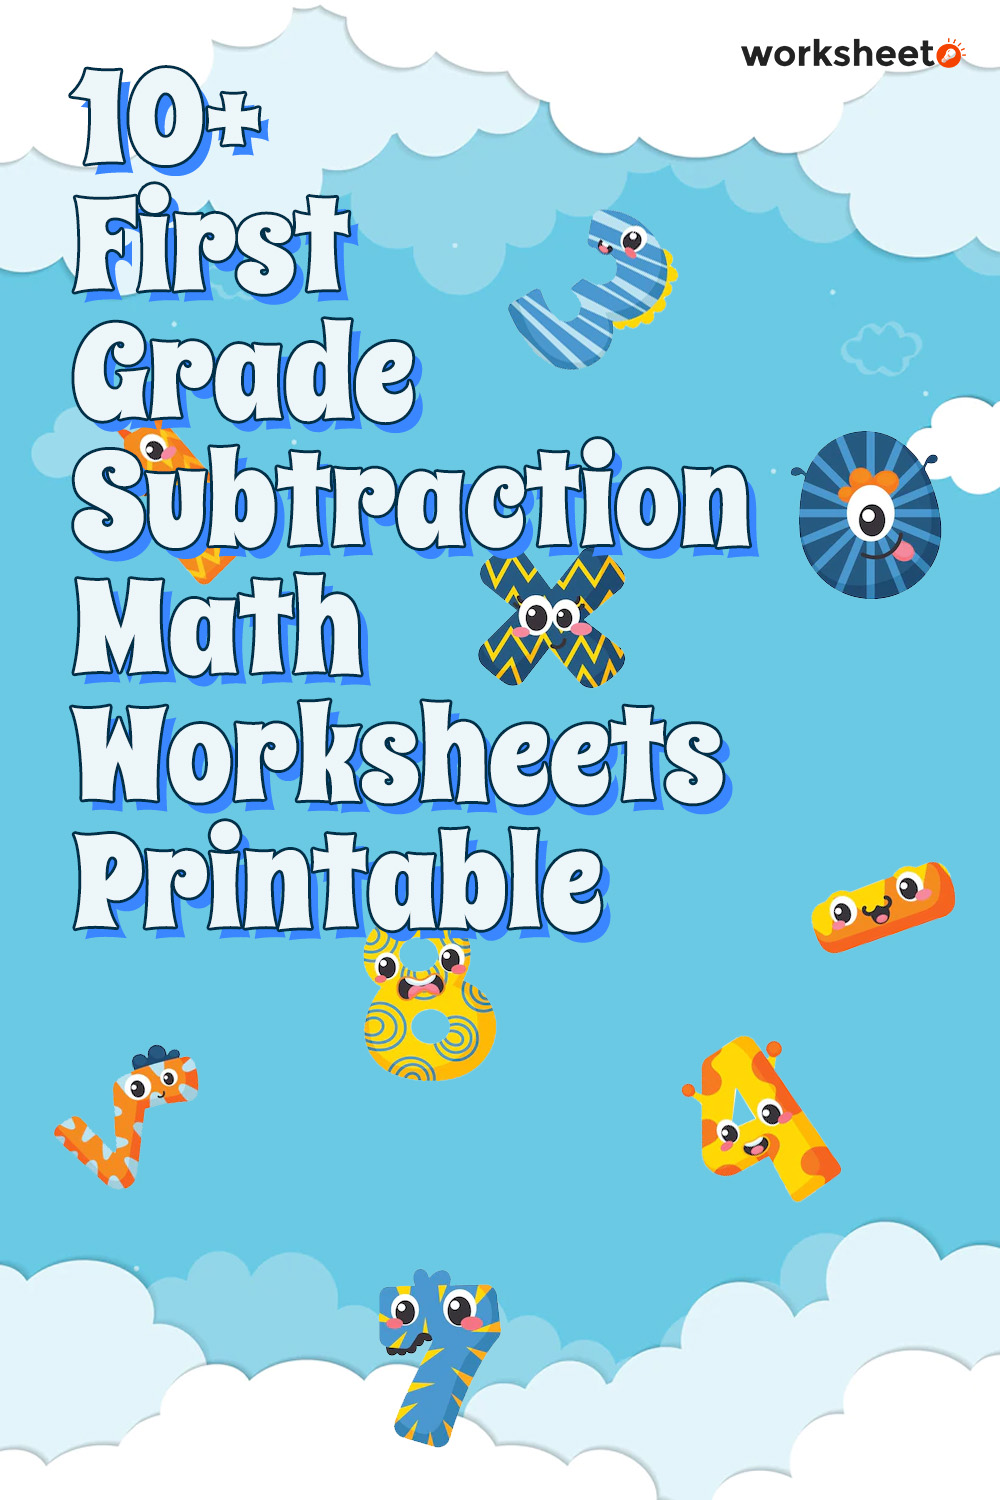 First Grade Subtraction Math Worksheets Printable